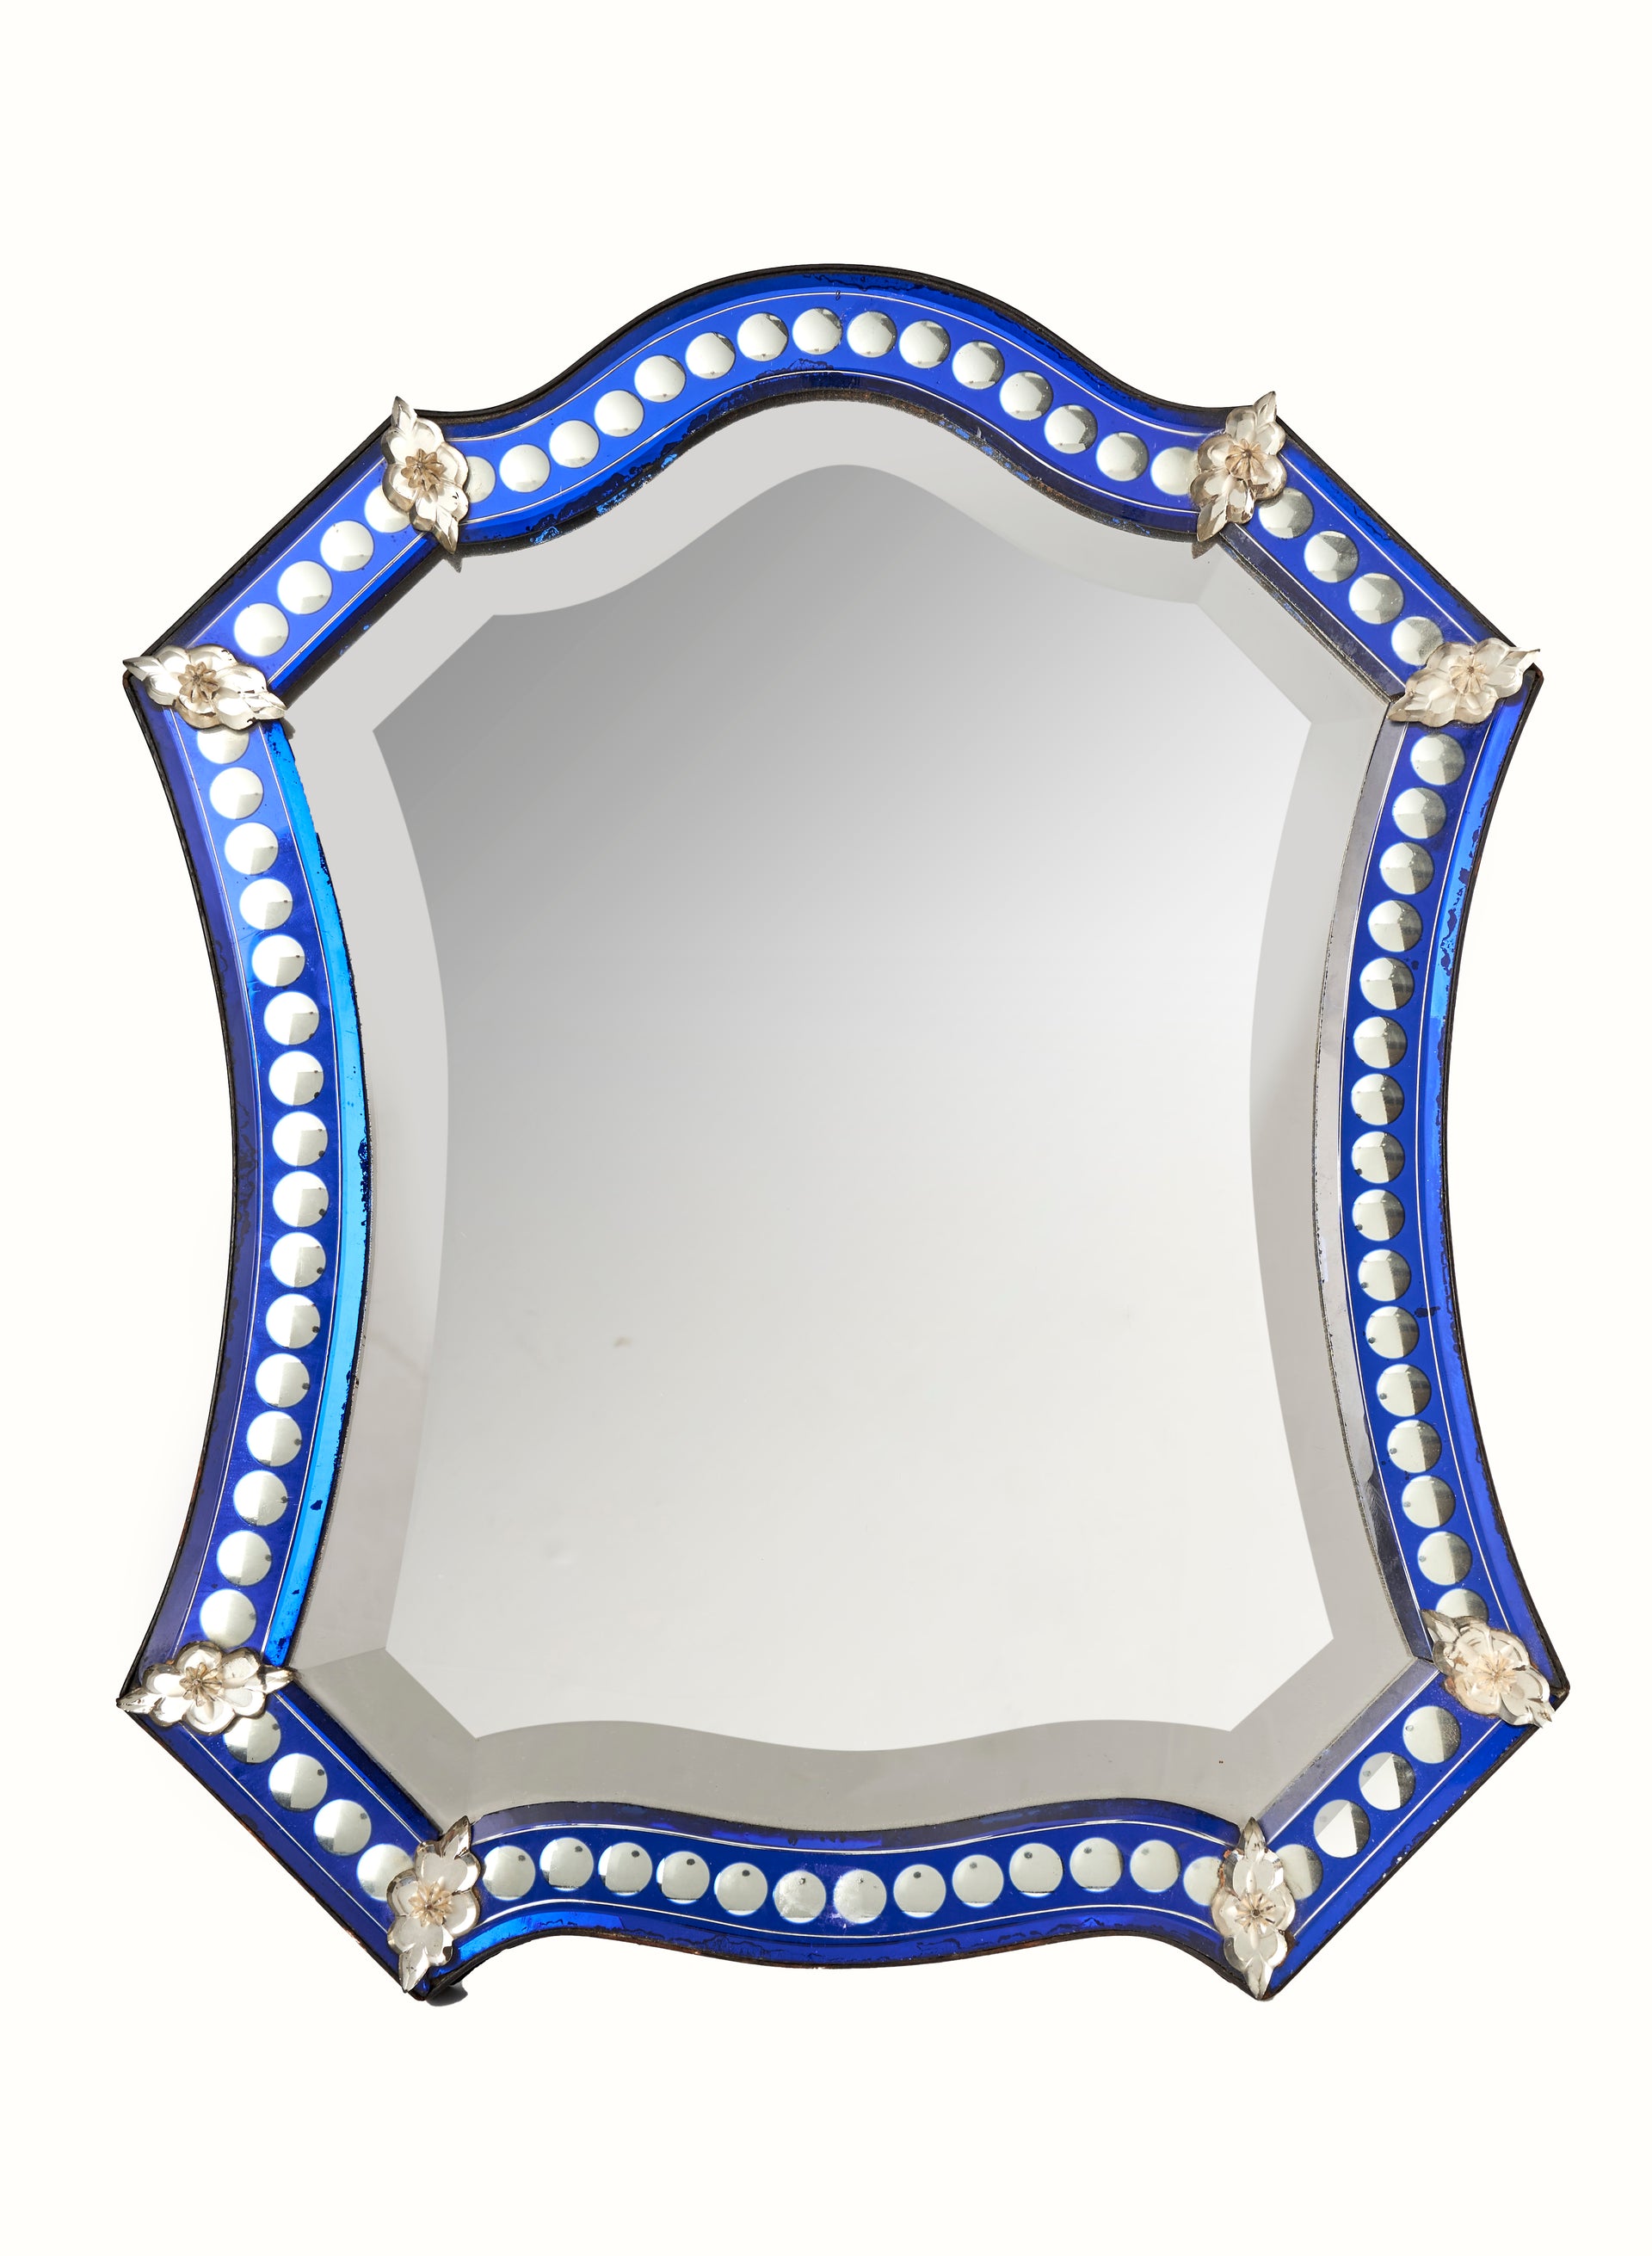 SOLD A fine quality and beautiful blue and clear glass dressing table mirror, Venini or Murano, Italian circa 1900